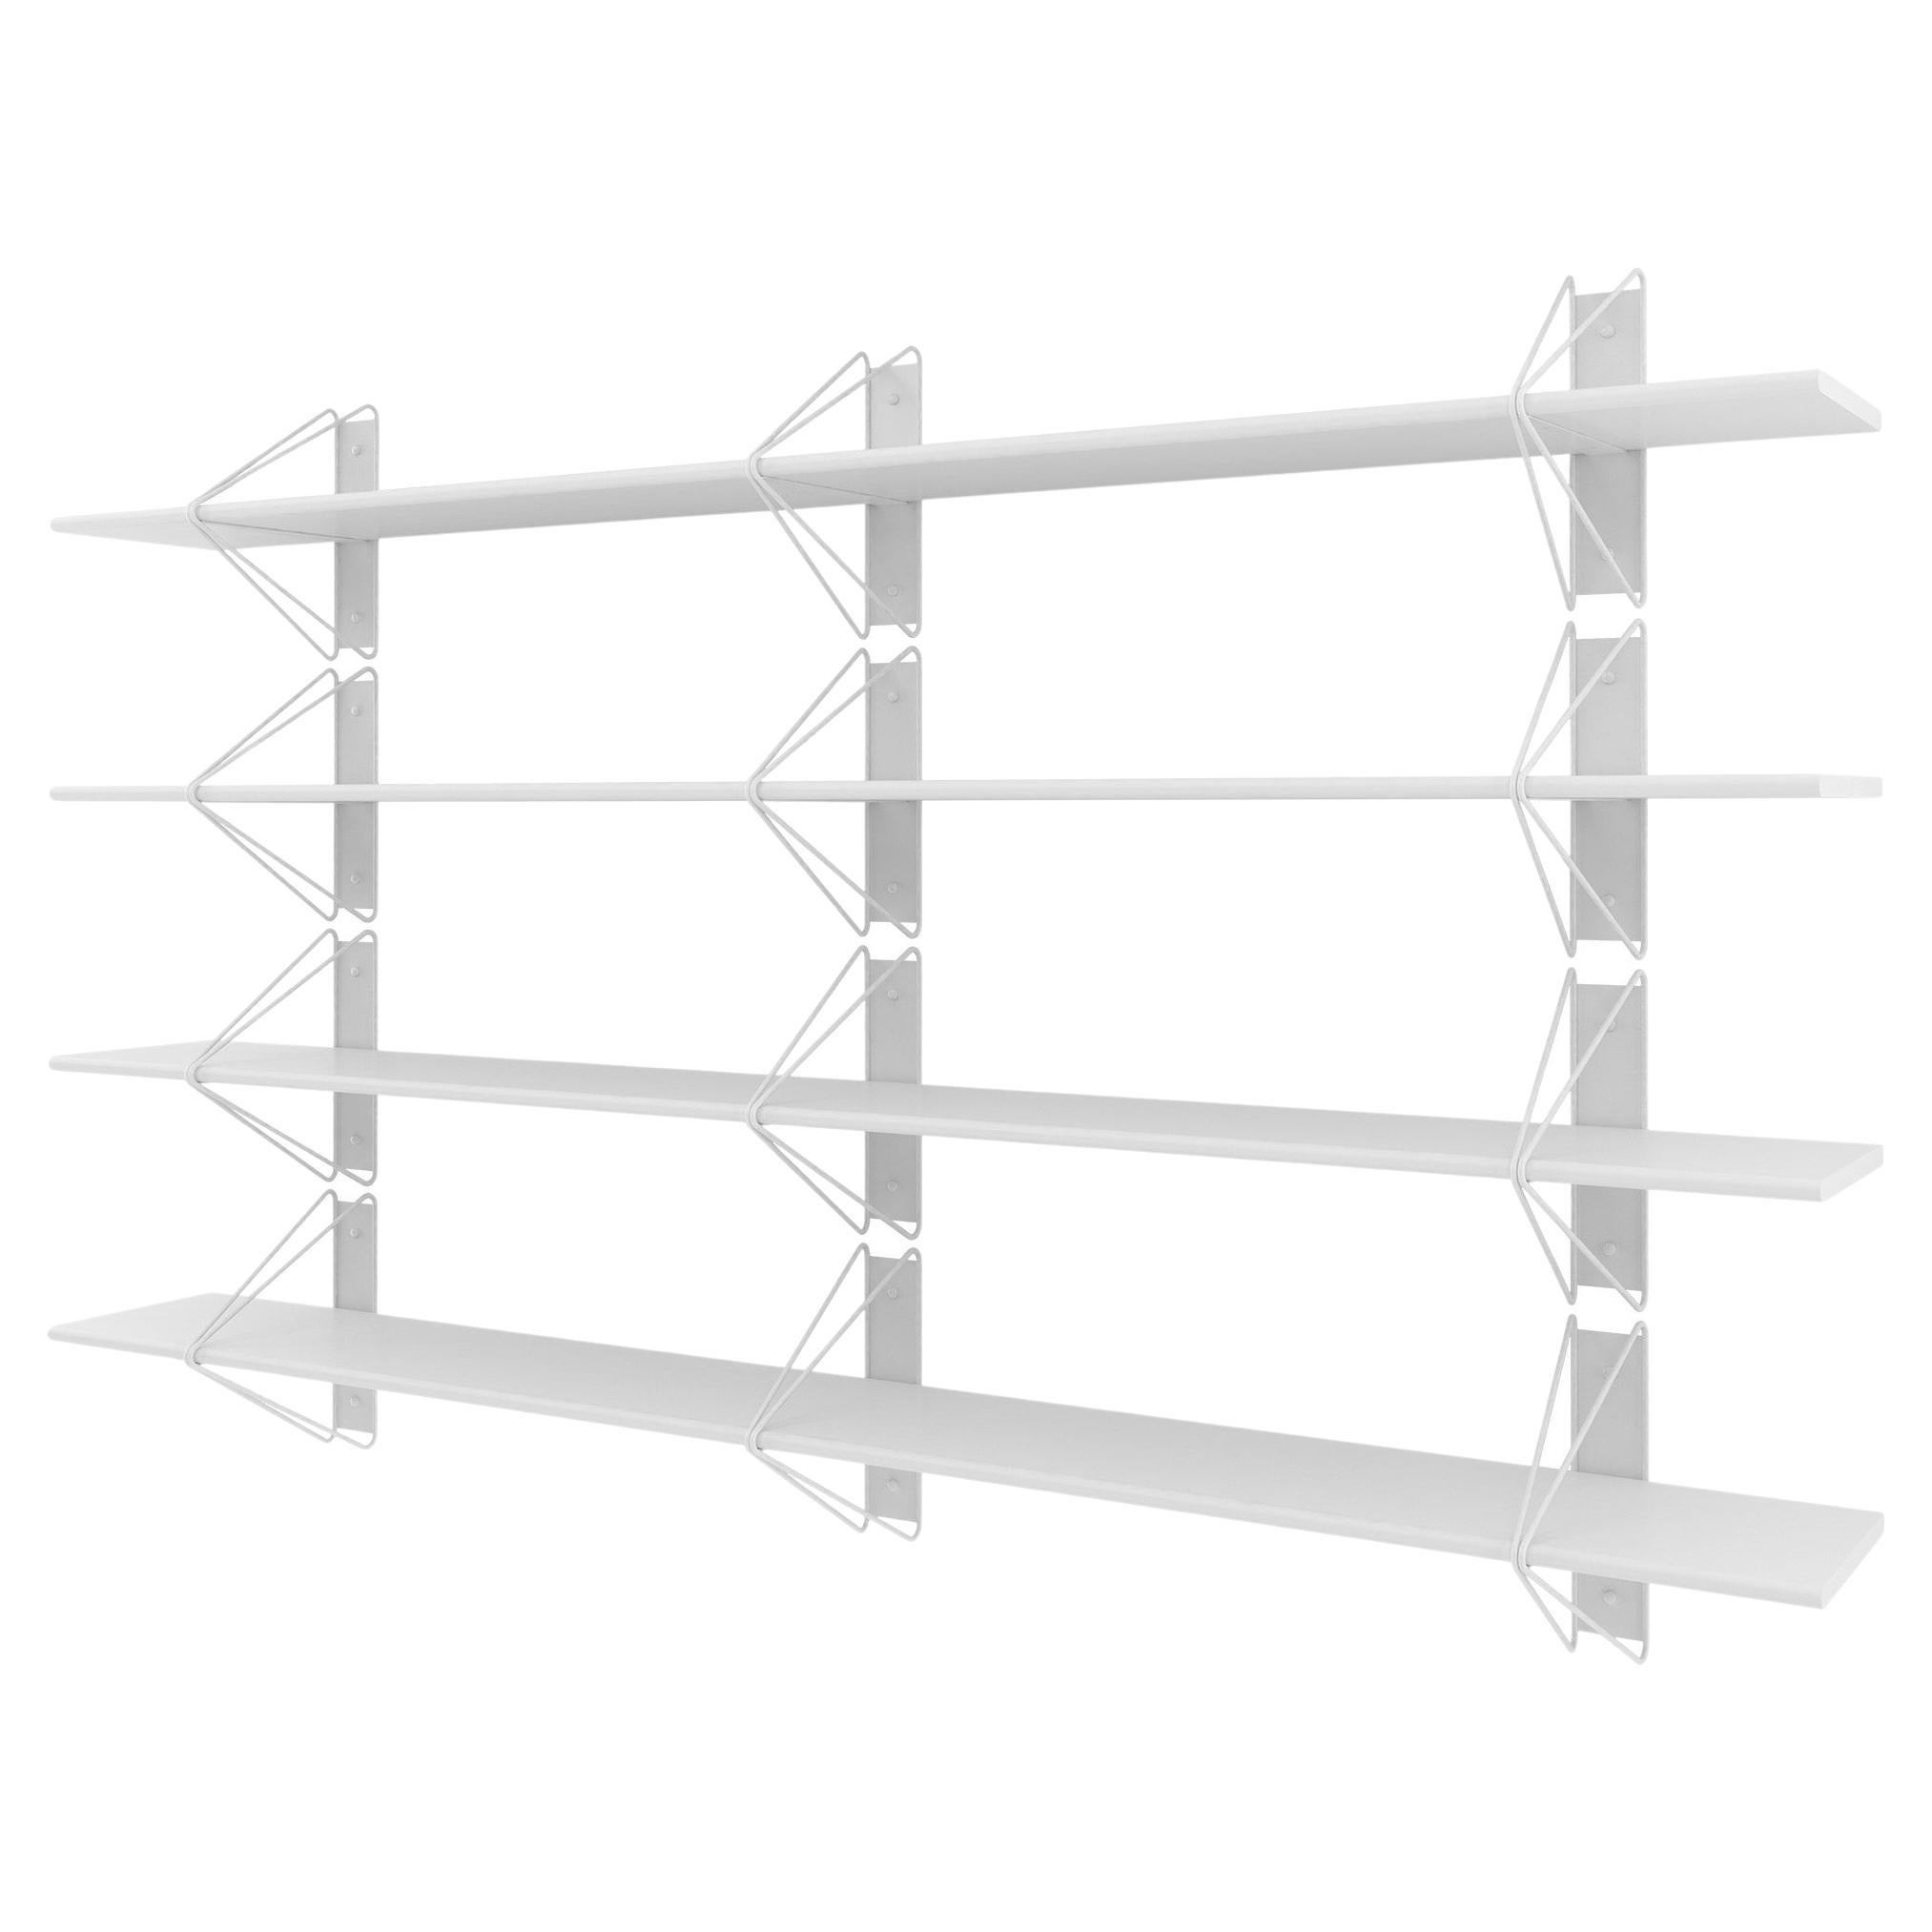 Set of 4 Strut Shelves from Souda, White, Made to Order